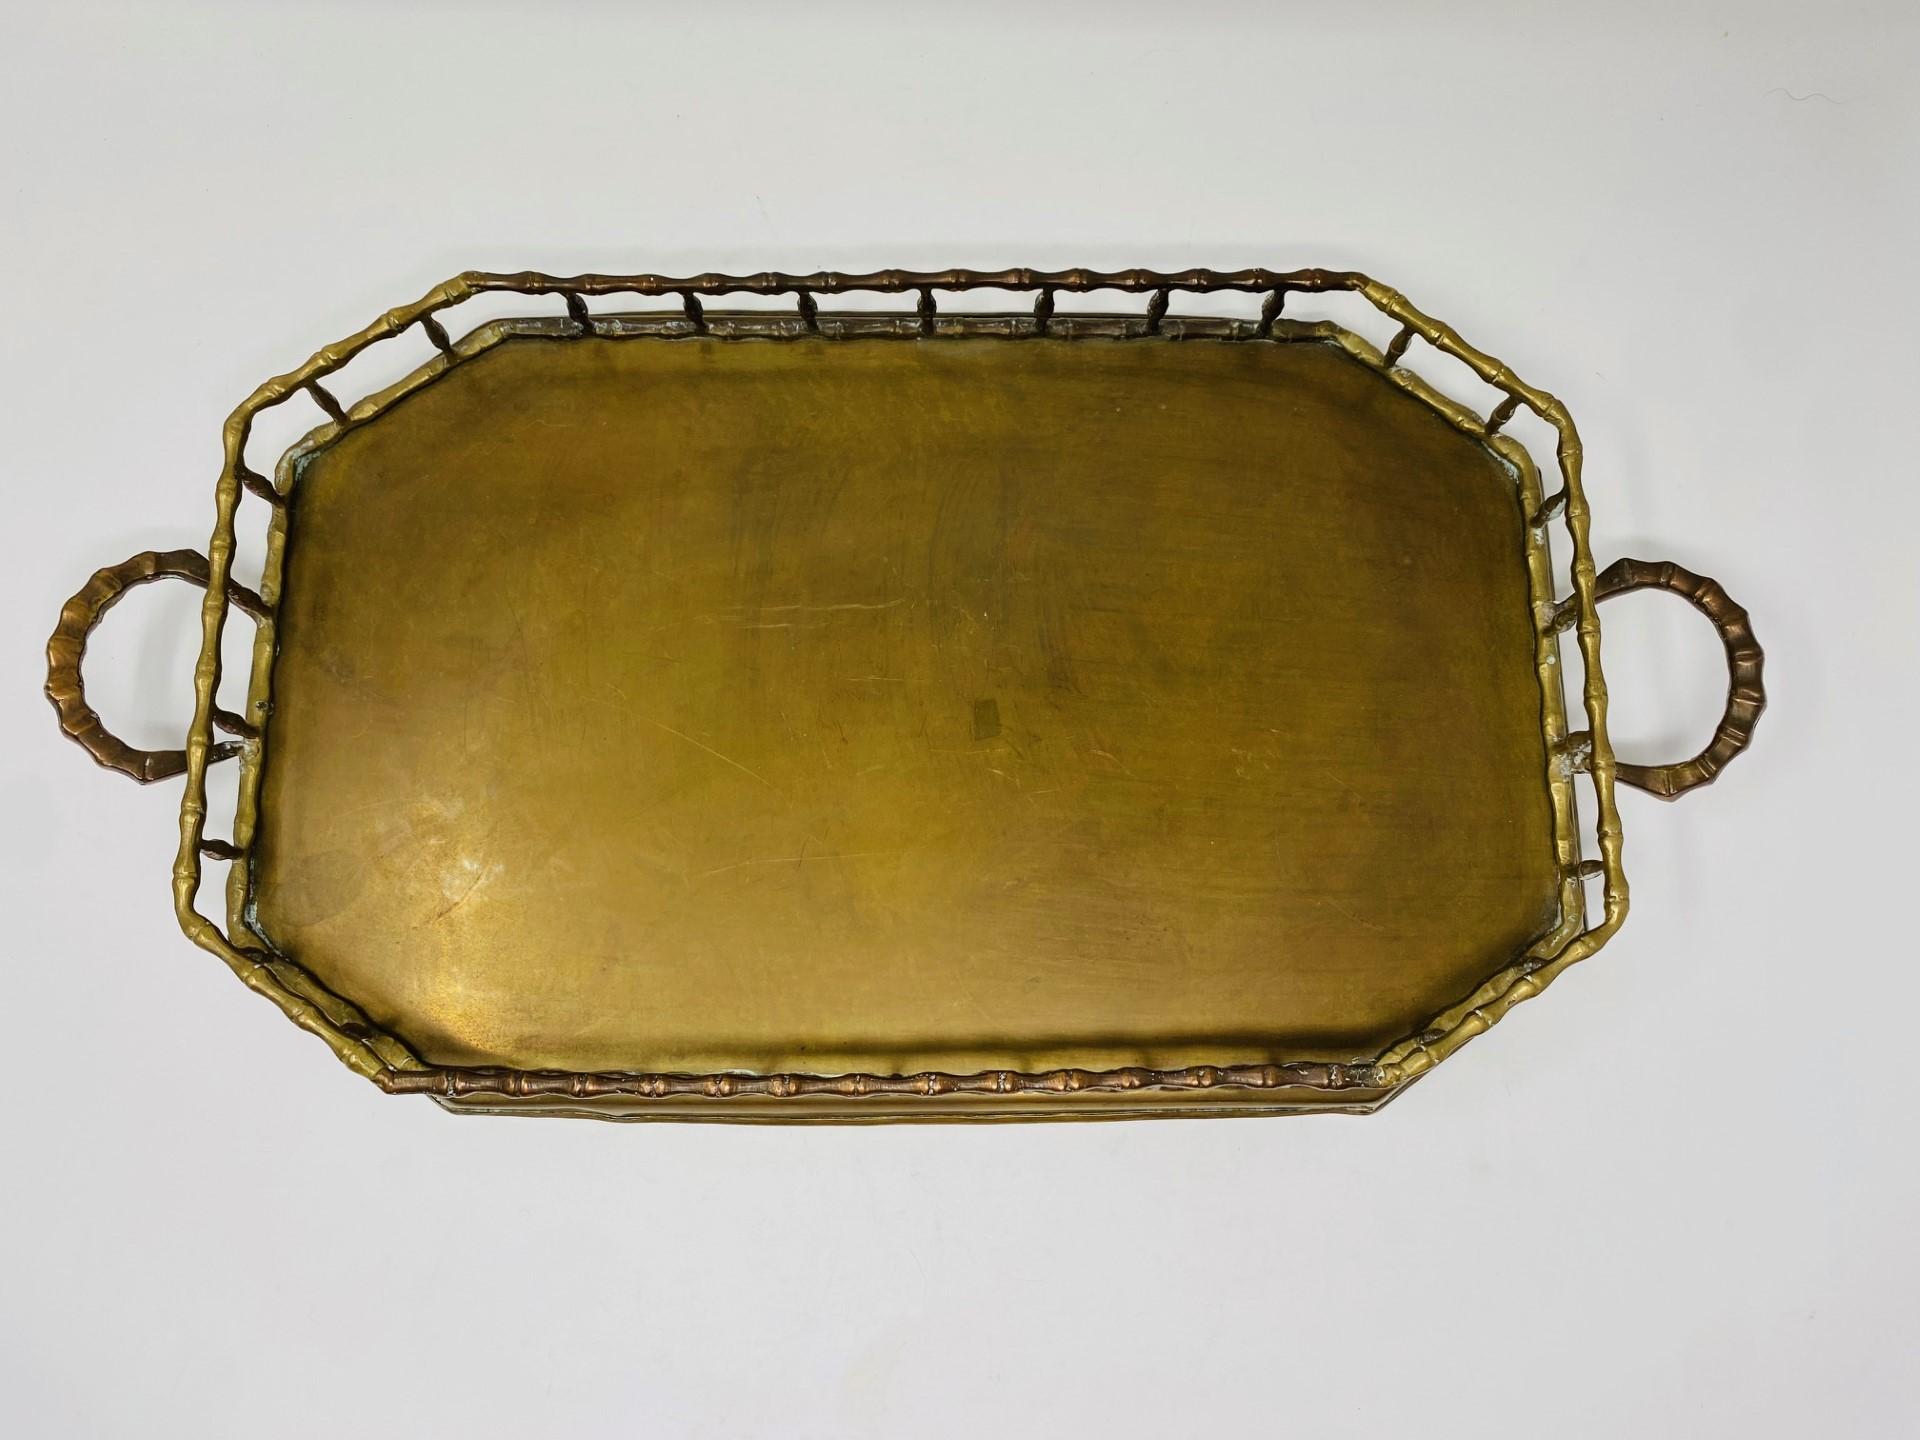 Beautifully luxurious and incredibly glamourous brass serving tray. This serving tray in a faux bamboo design brings Hollywood presence to your décor. The faux bamboo design is sculptural and wraps around the octagonal piece including in the